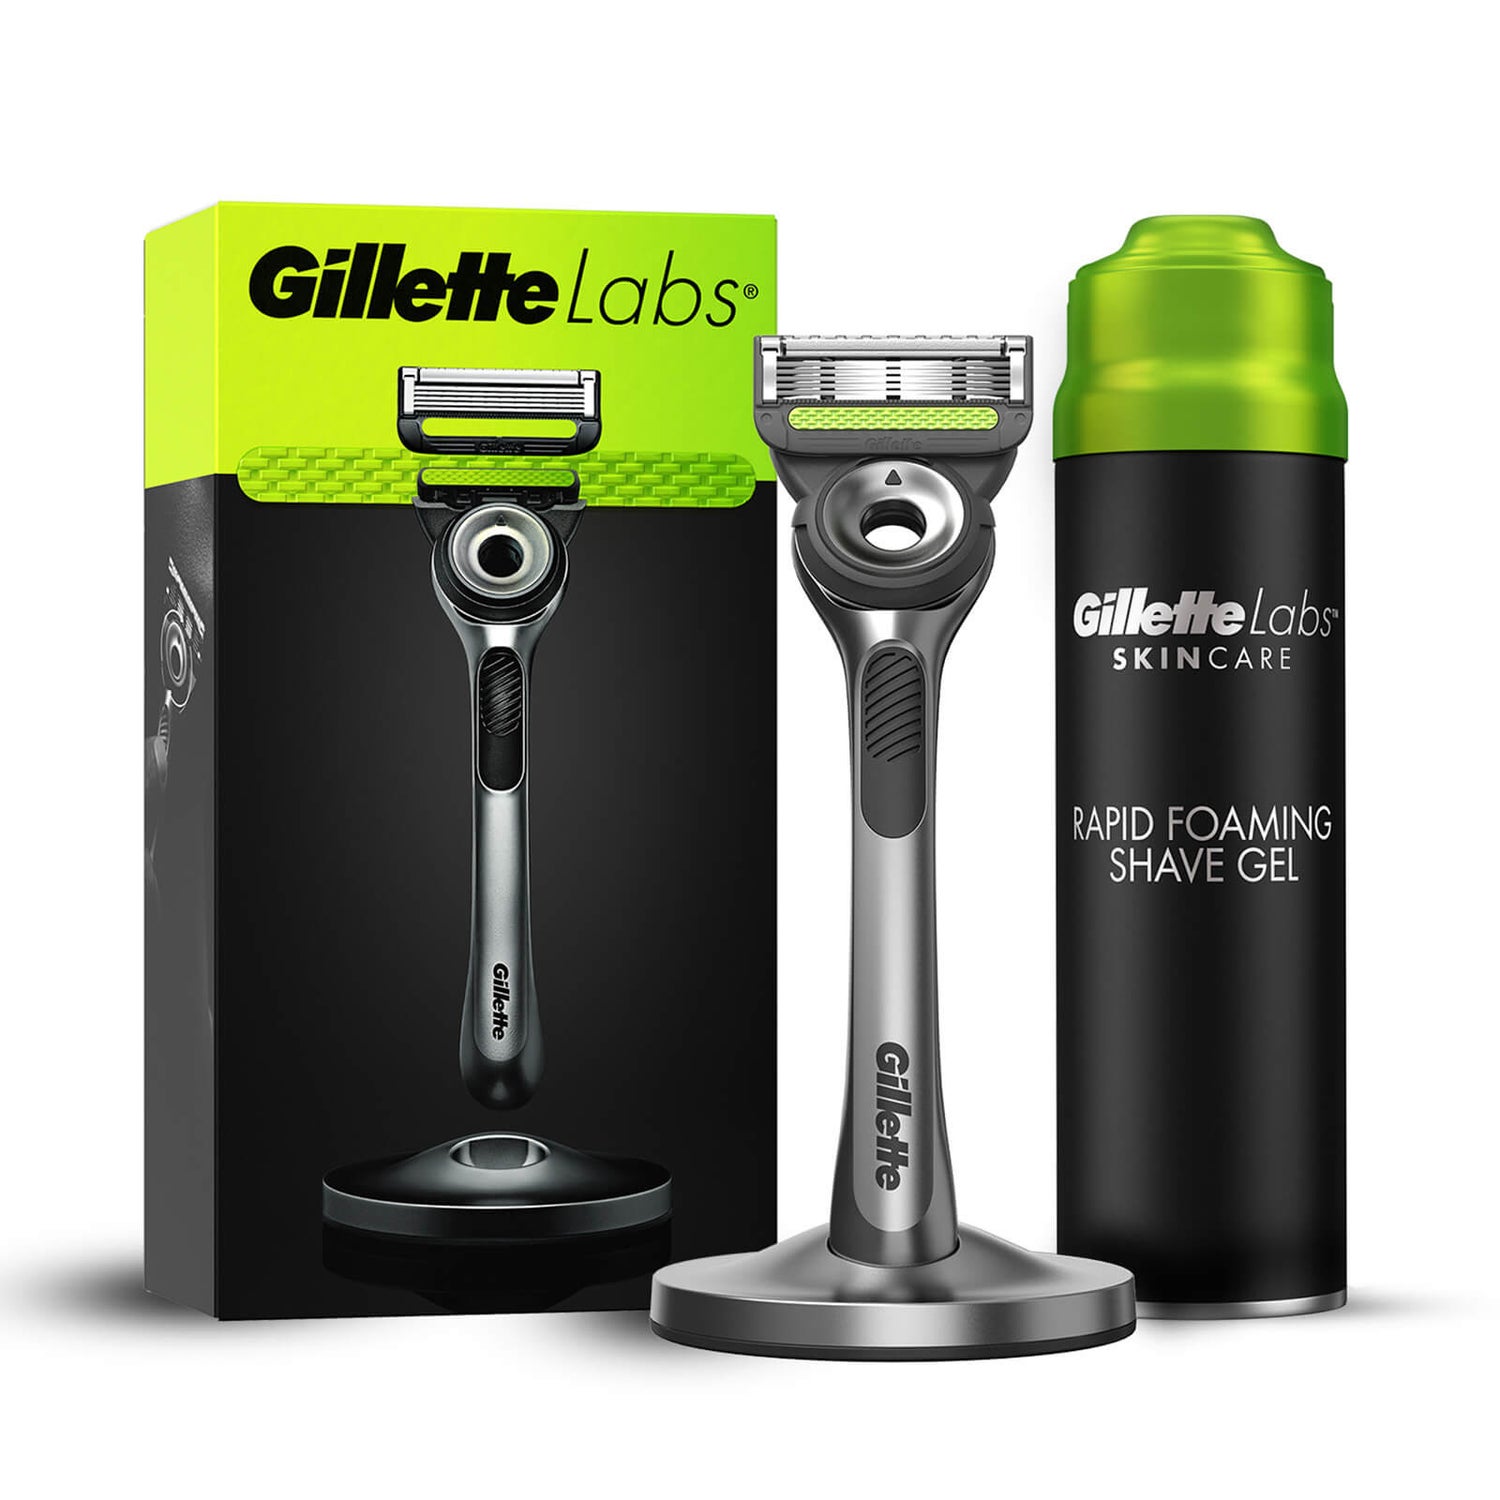 Gillette Labs Razor with Exfoliating Bar and Shaving Gel